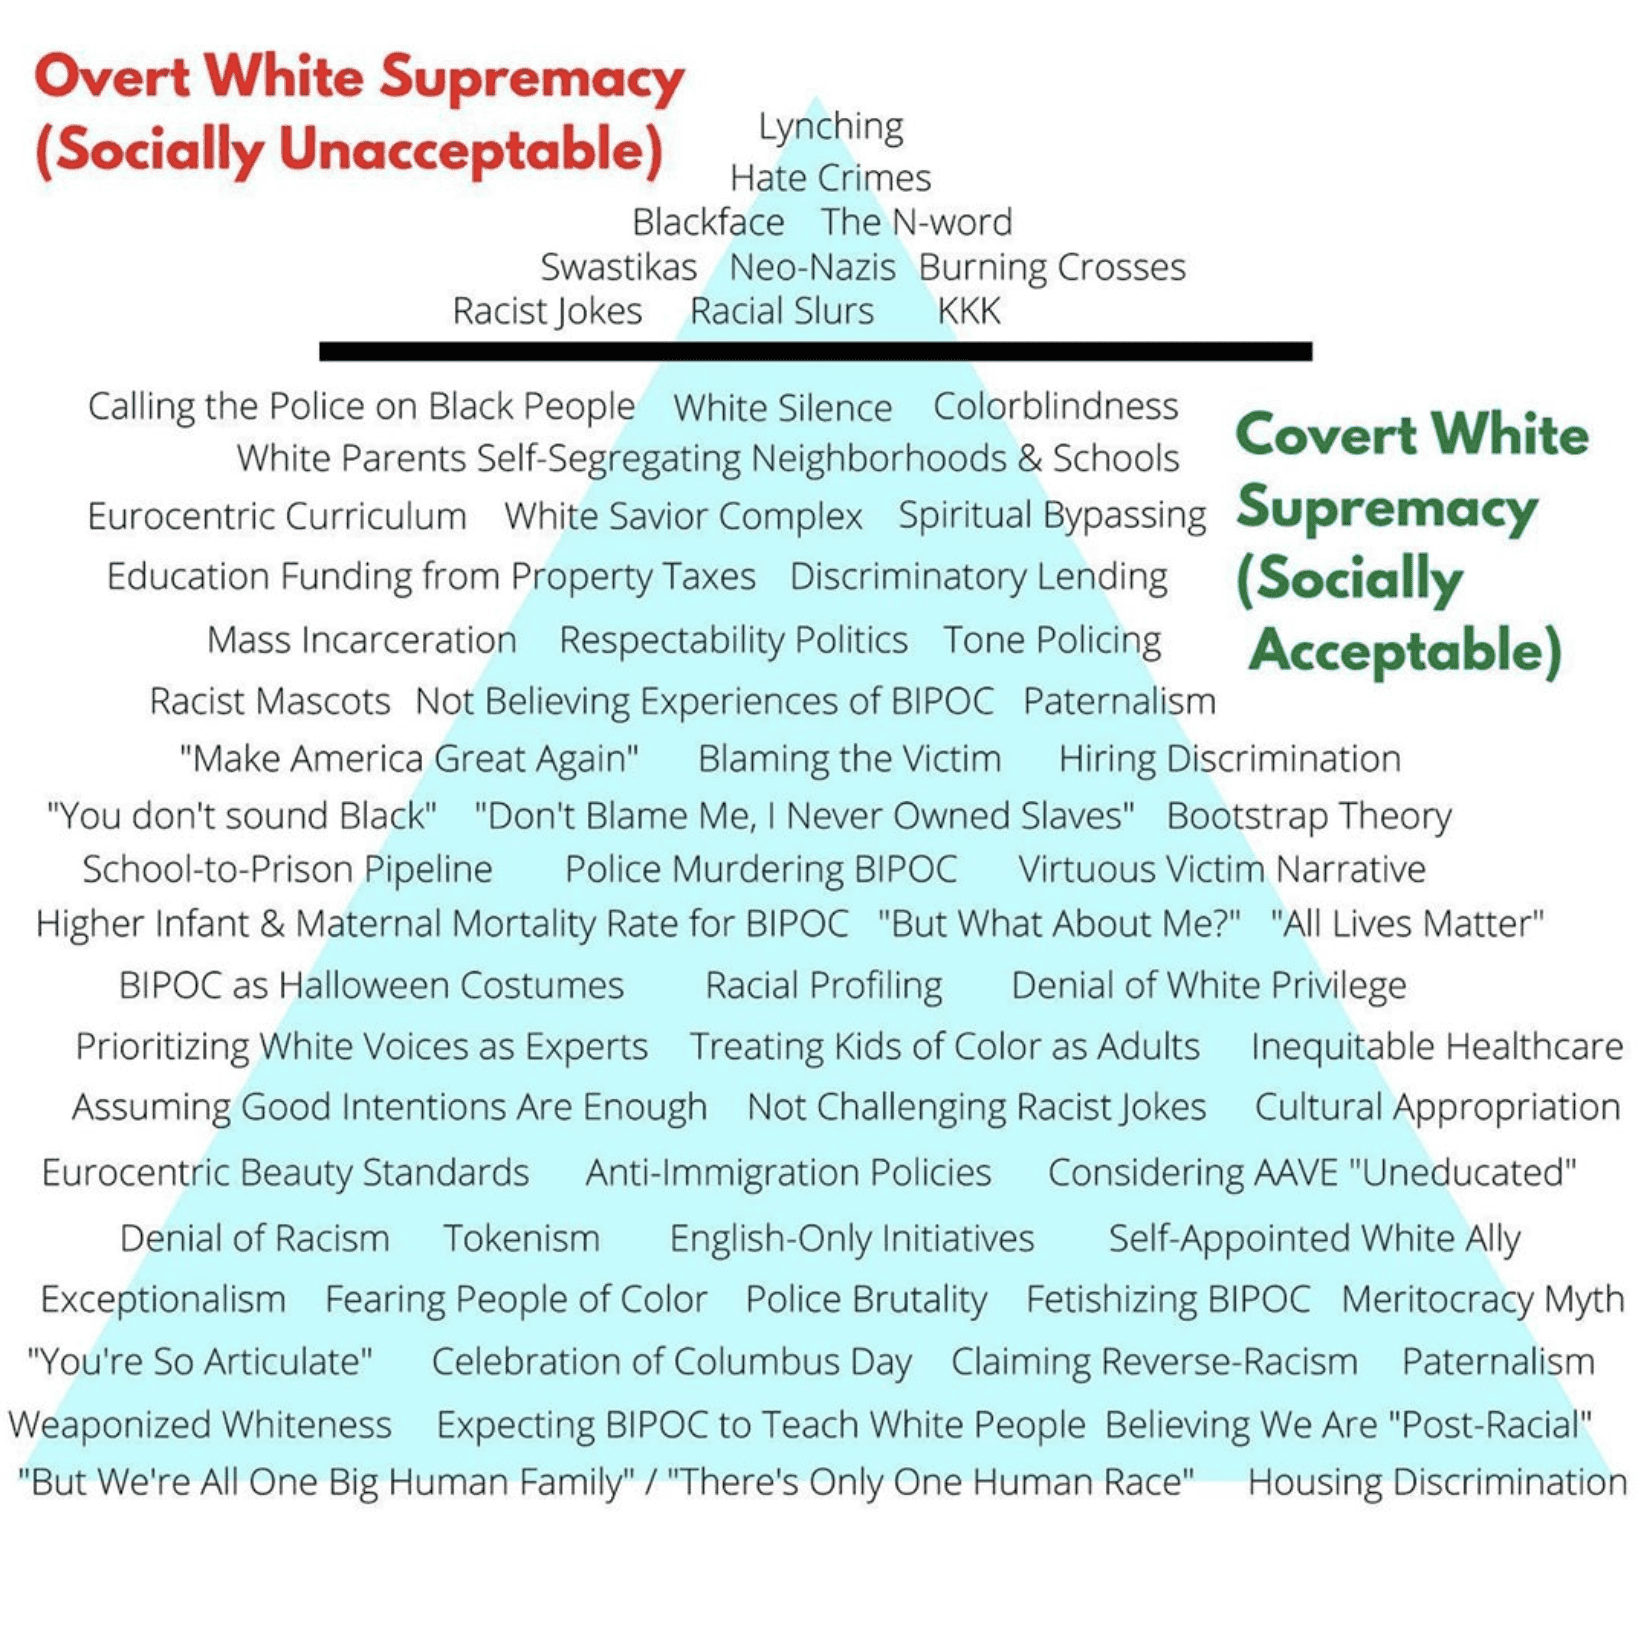 A pyramid listing overt white supremacy at the top (ie Lynching, hate crimes, racial slurs) and examples of covert white supremacy below (ie white silence, colorblindness, hiring discrimination, etc)